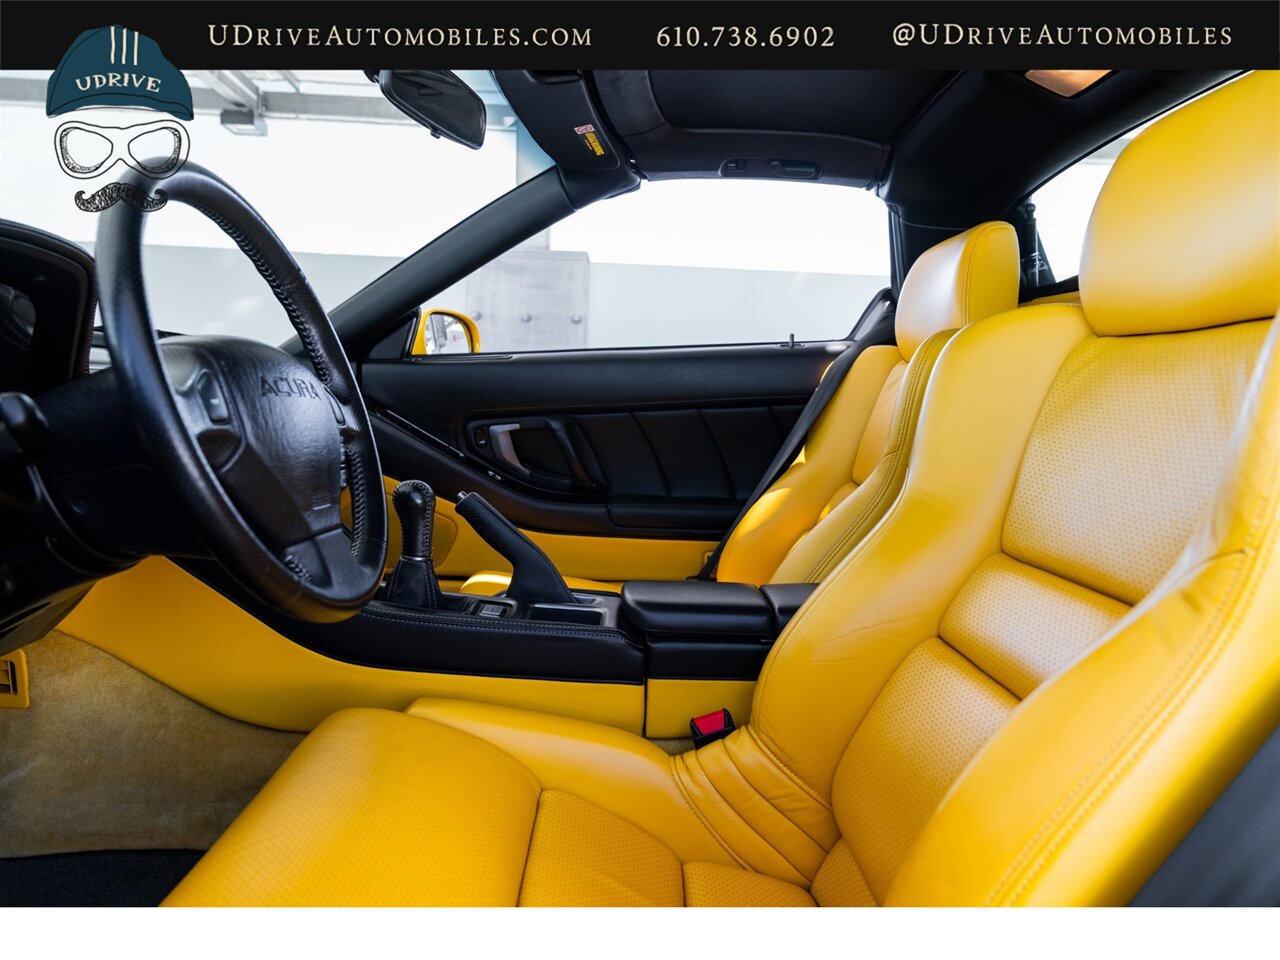 2003 Acura NSX NSX-T  Spa Yellow over Yellow Lthr 1 of 13 Produced - Photo 34 - West Chester, PA 19382